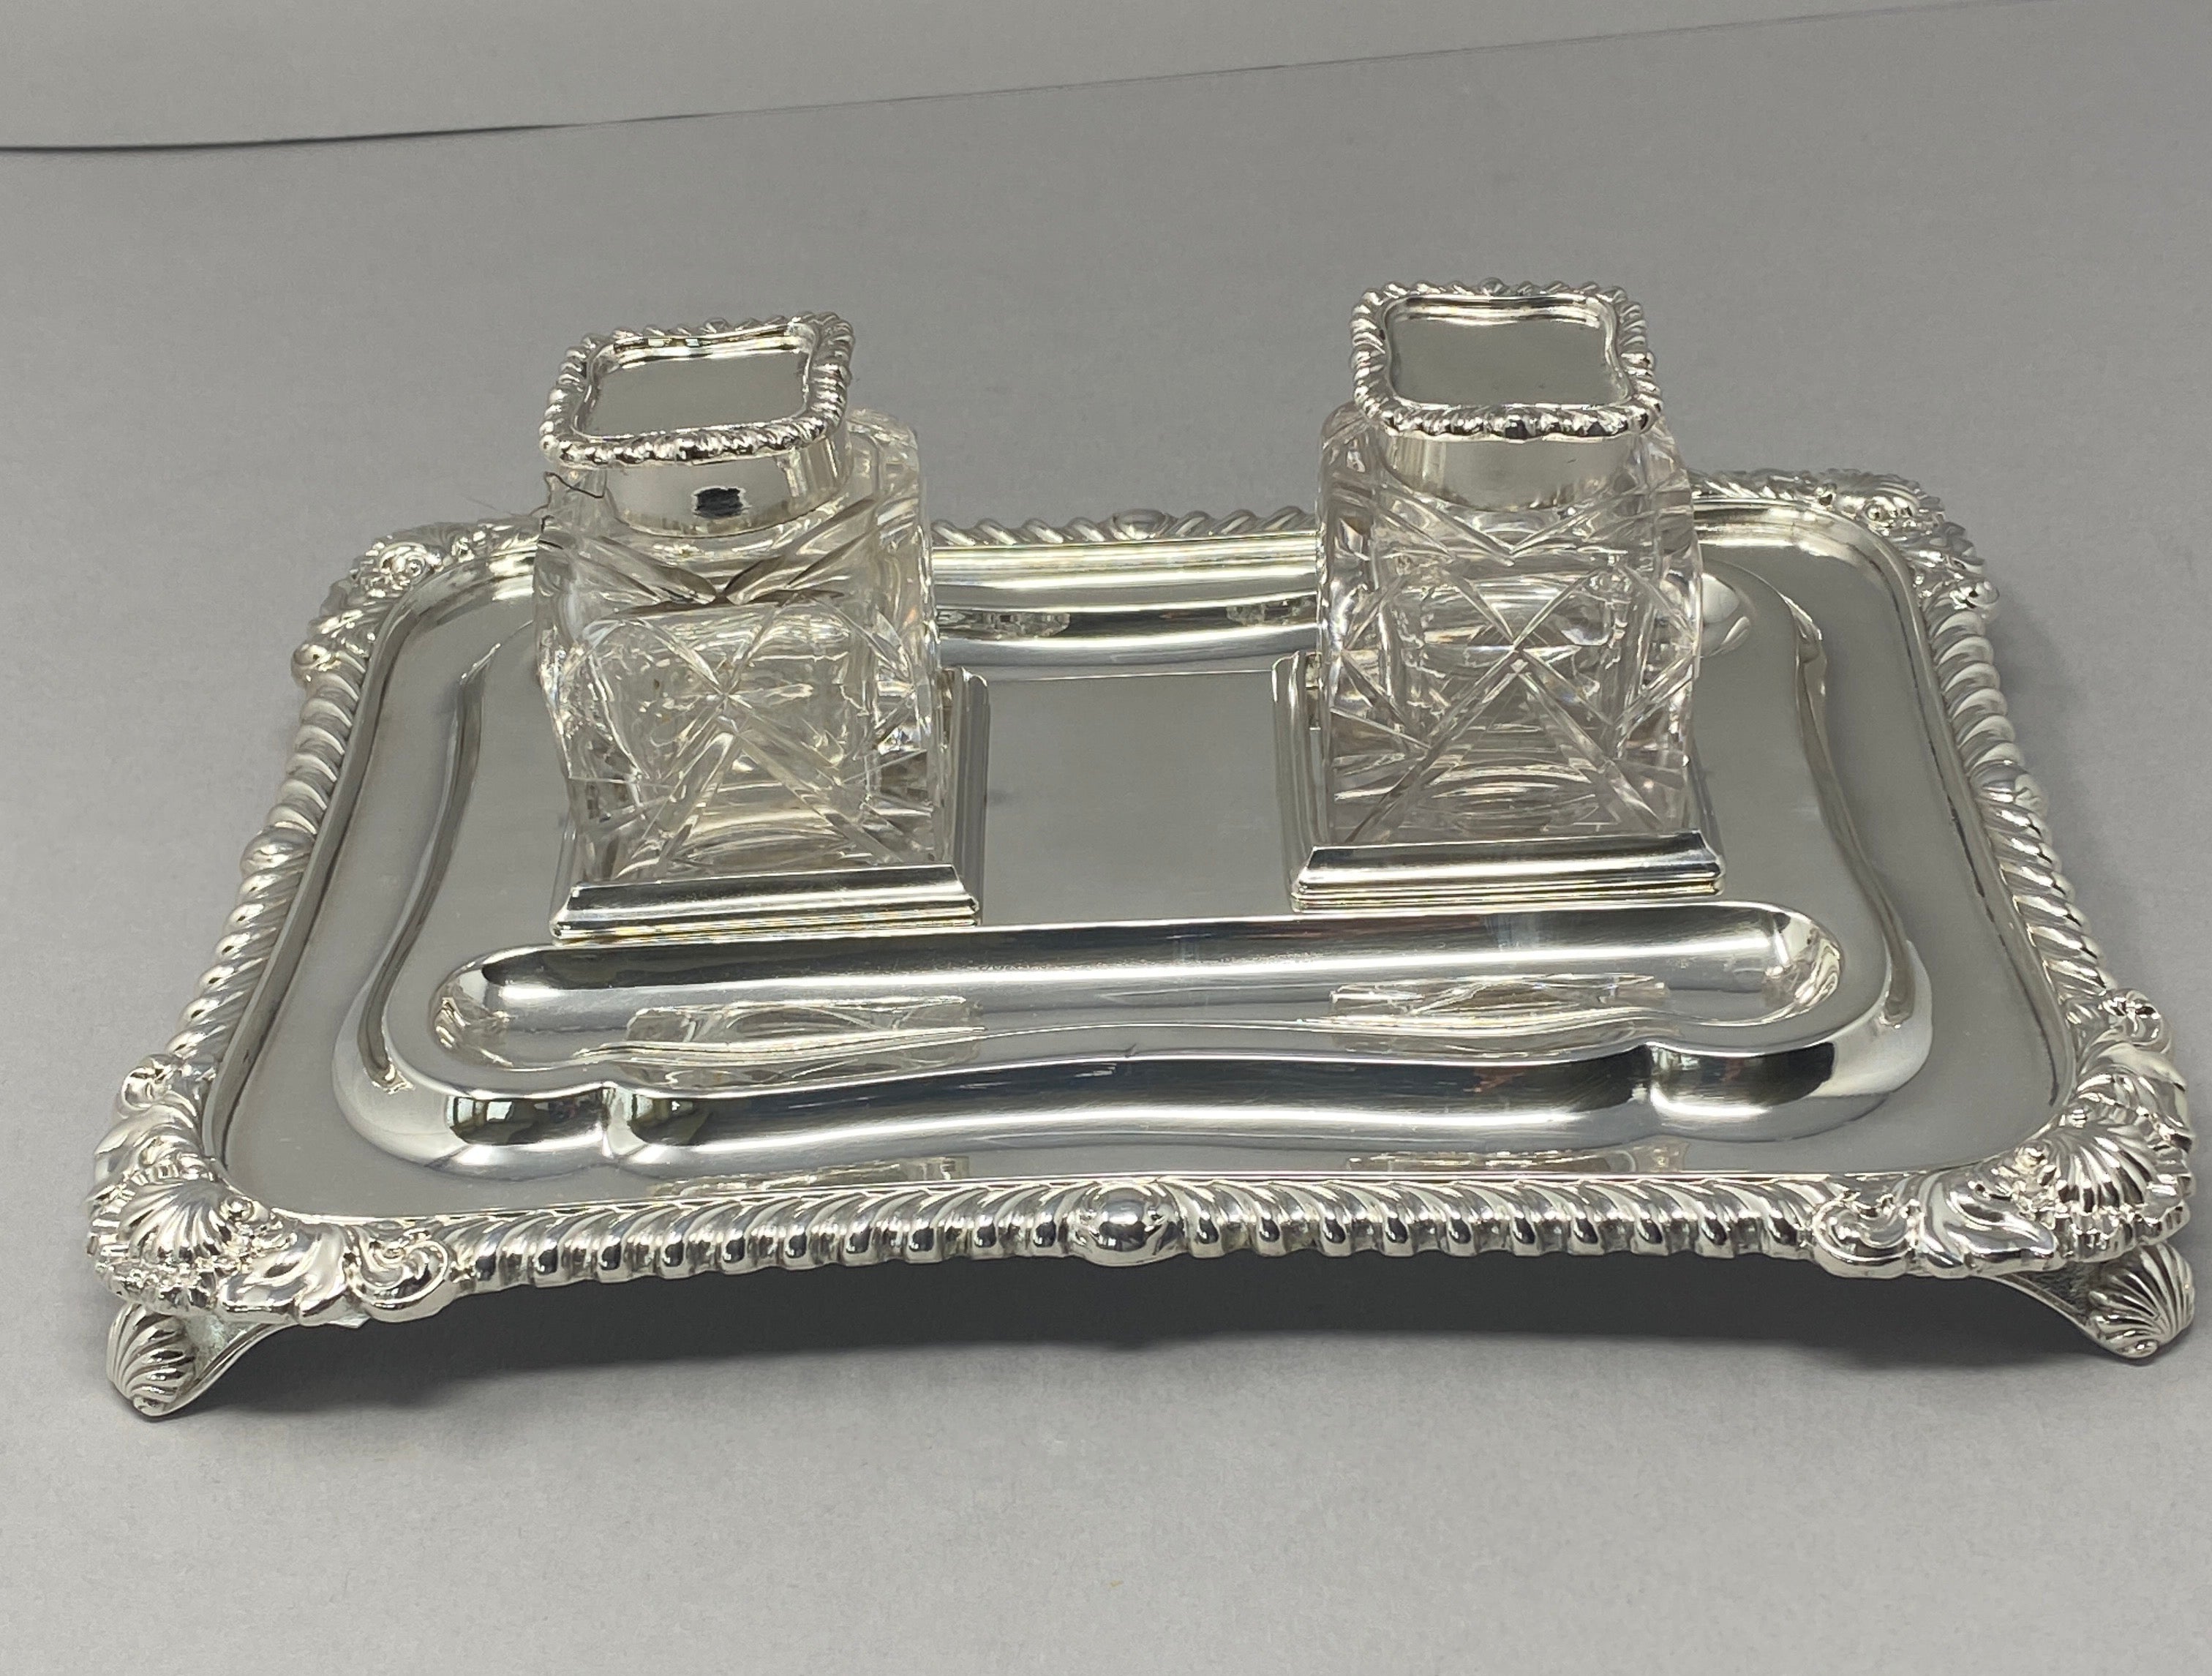 Silver Plated 2 Bottle Inkstand